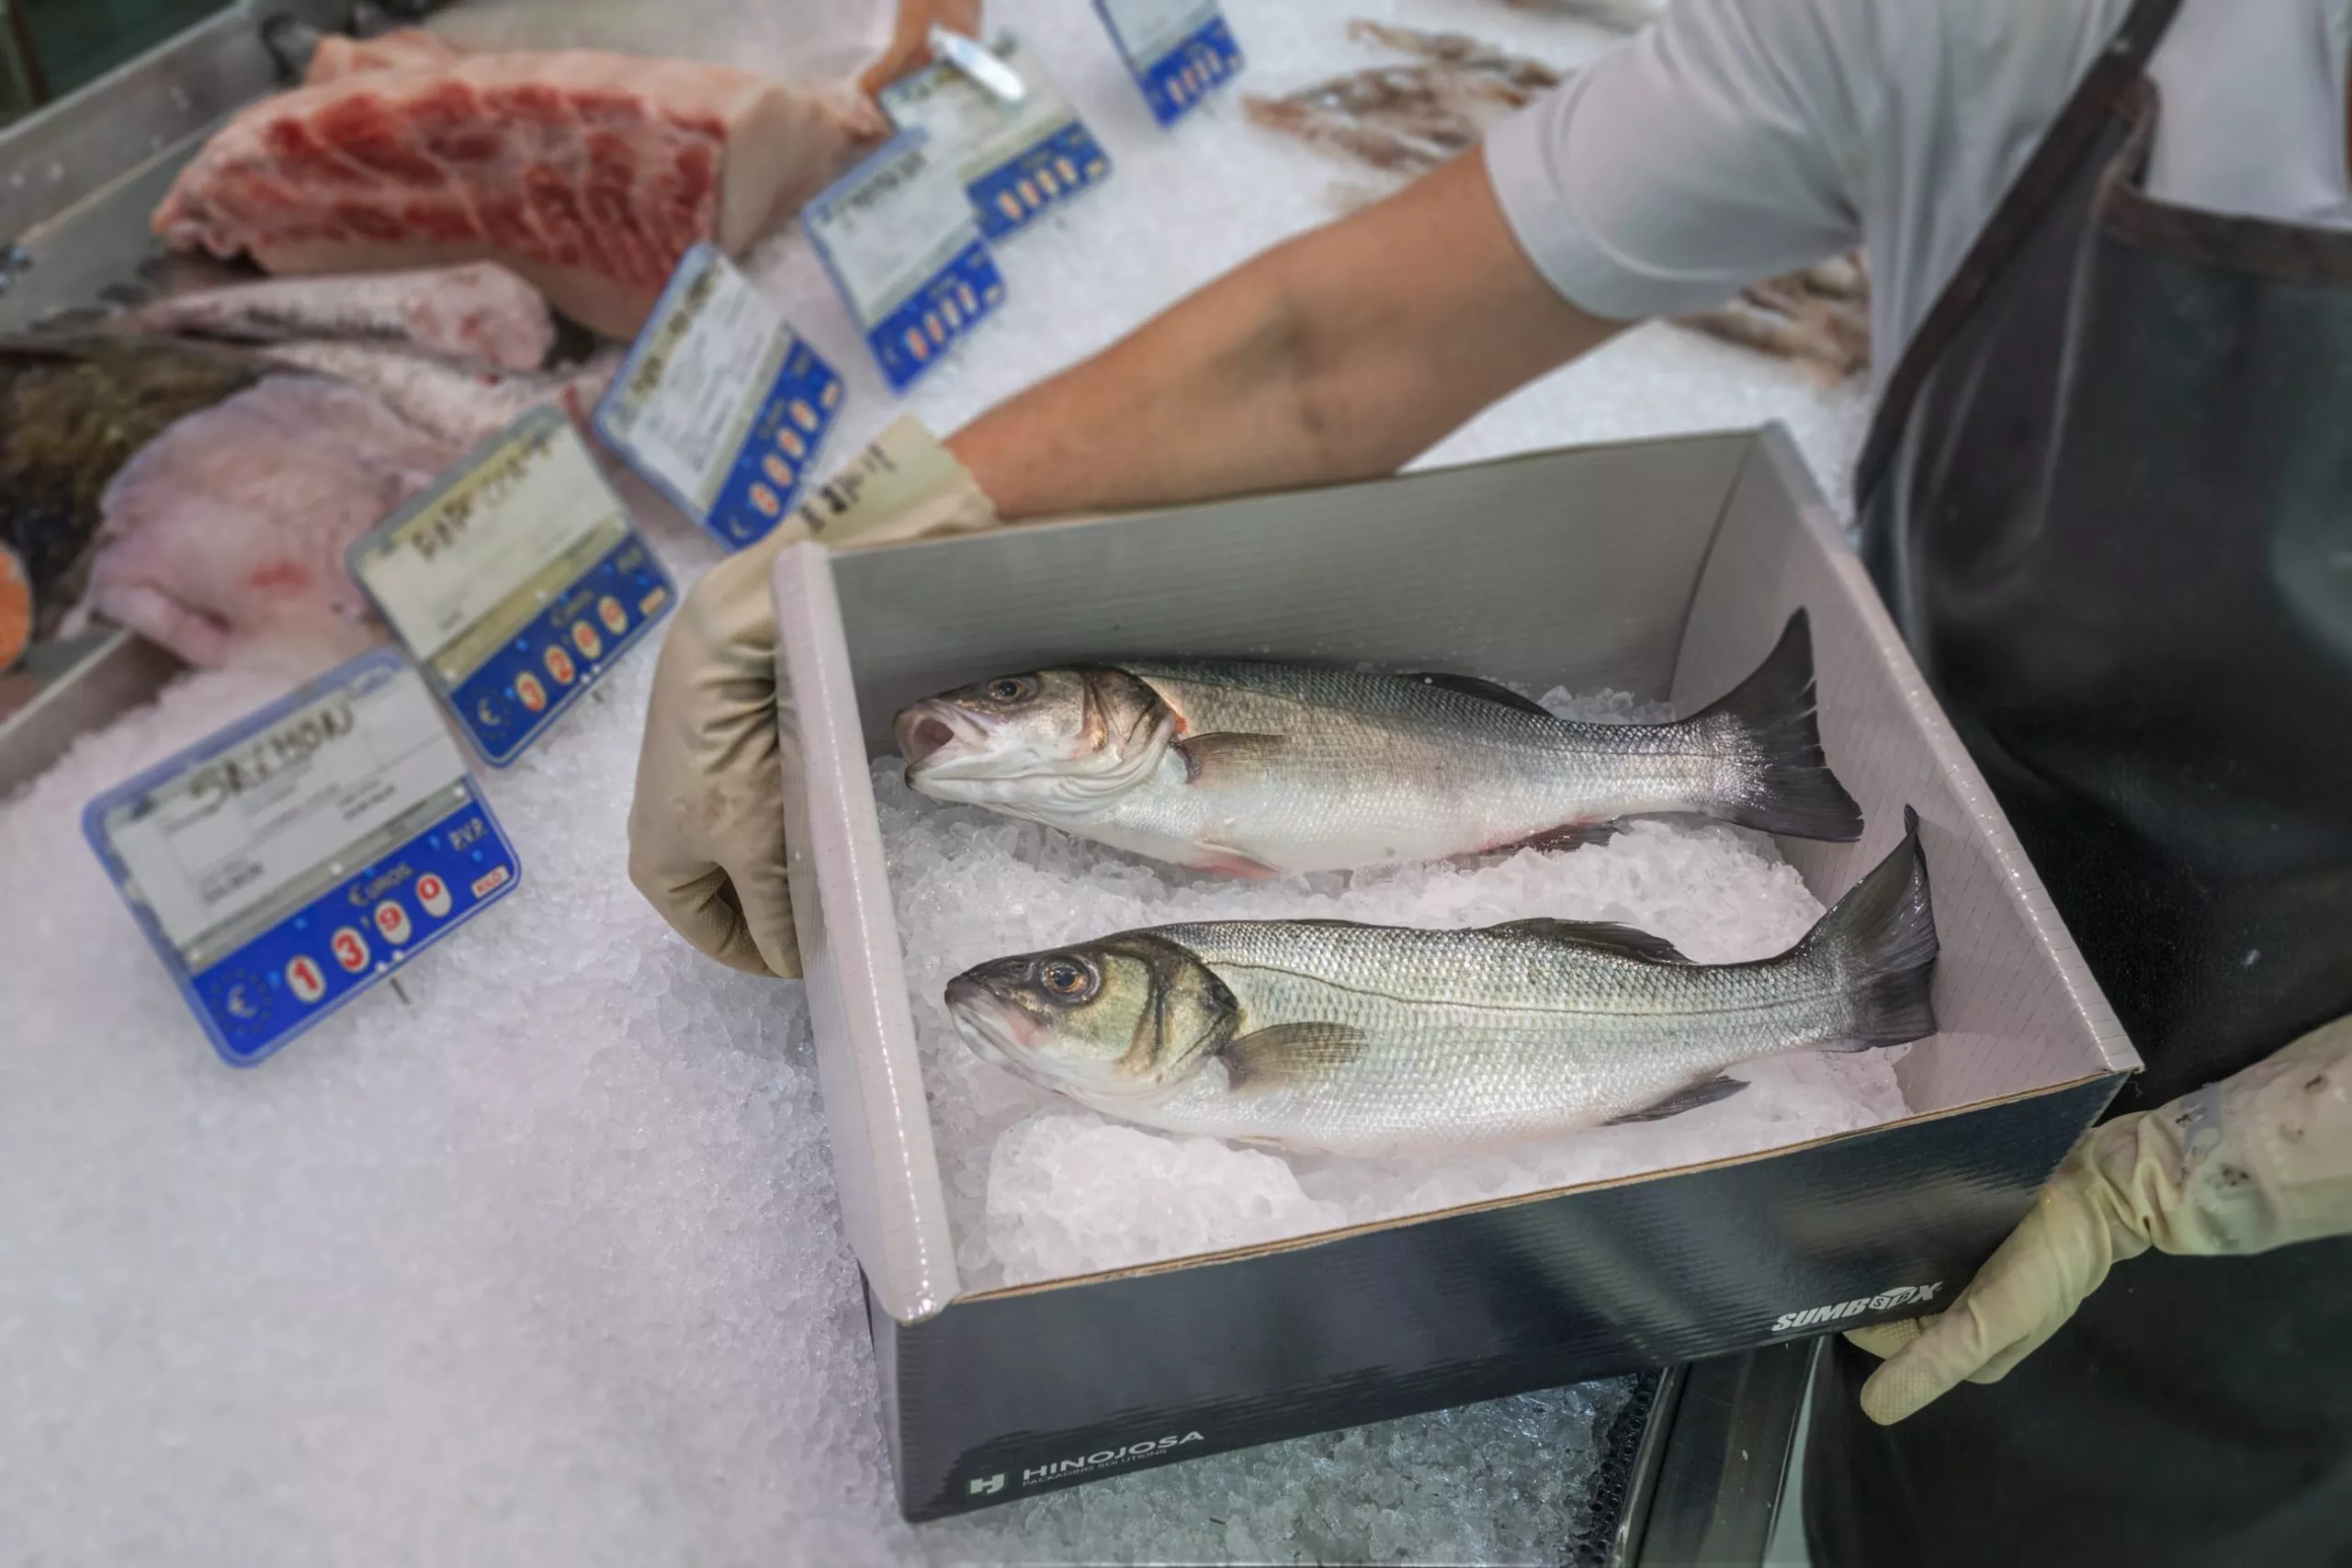 Hinojosa presents sustainable packaging for seafood at Conxemar